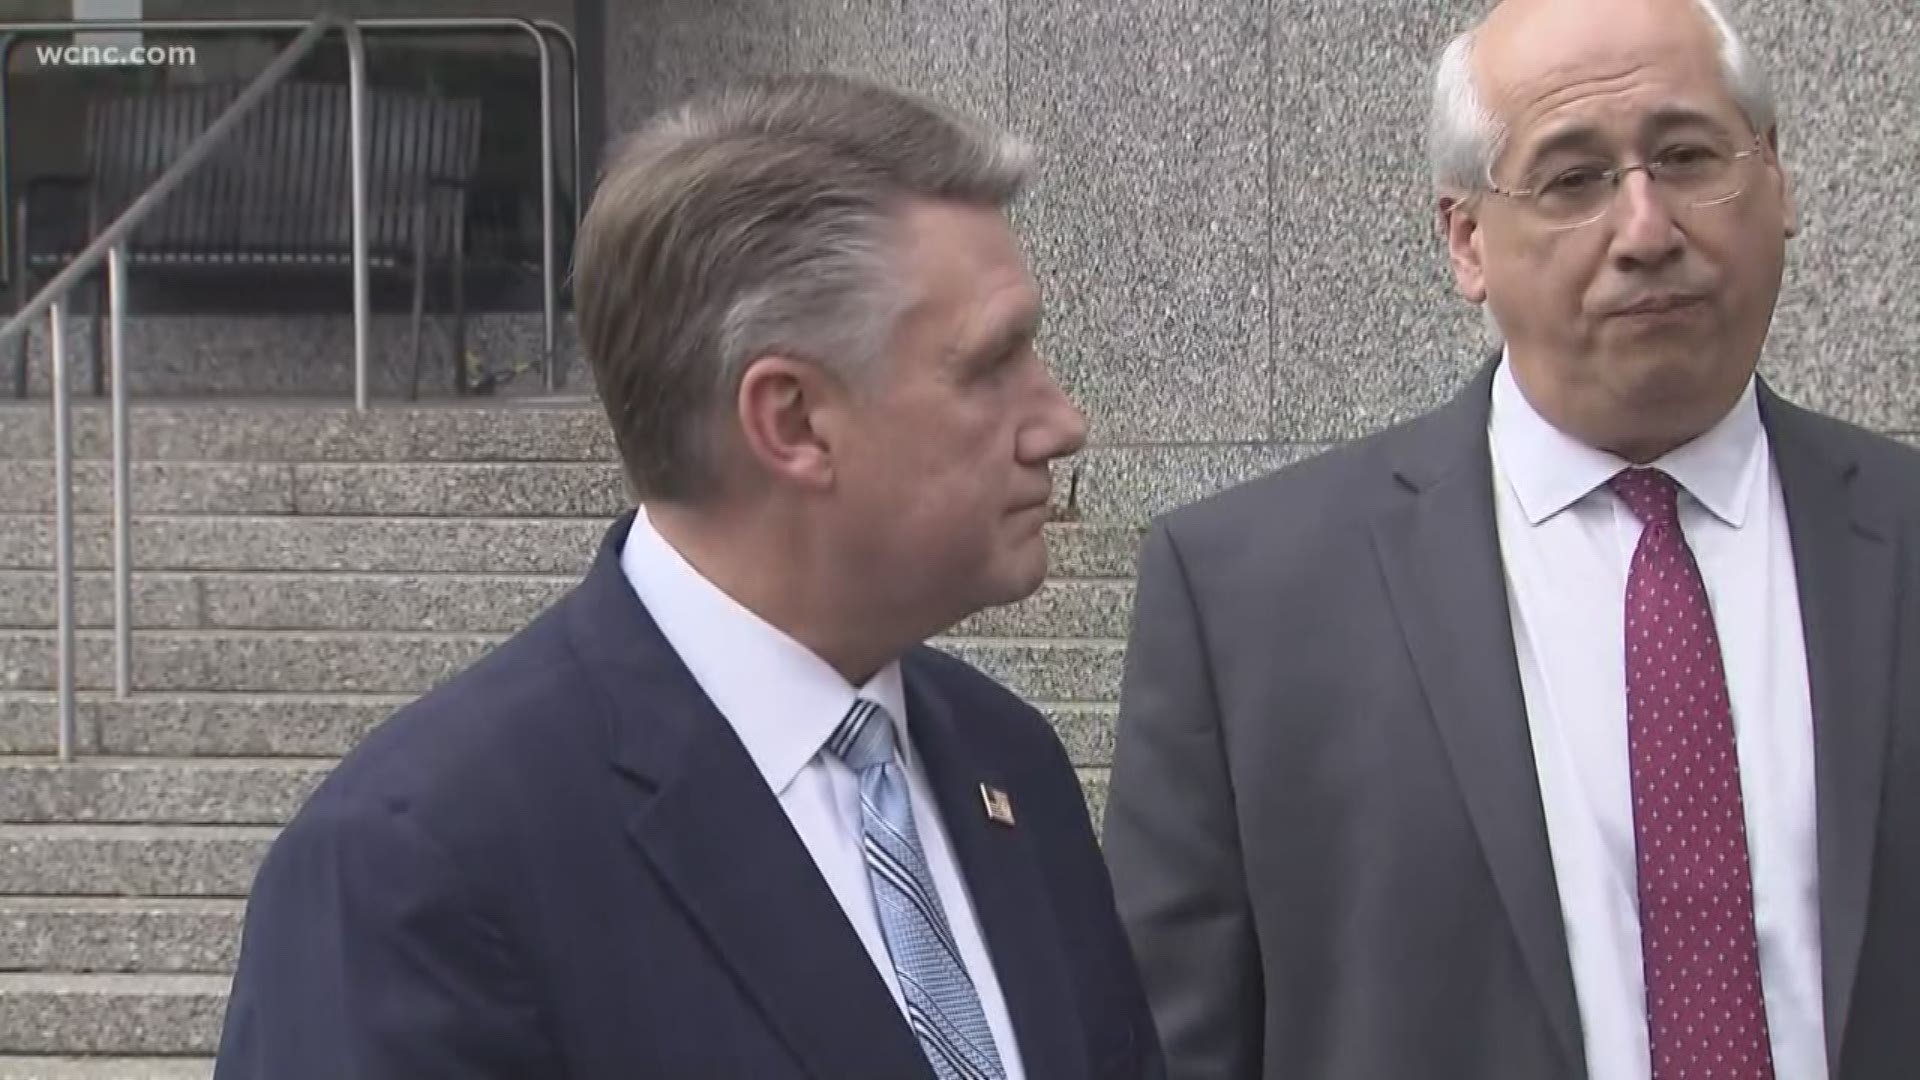 RAW: Mark Harris addresses the media after meeting with the state board of elections